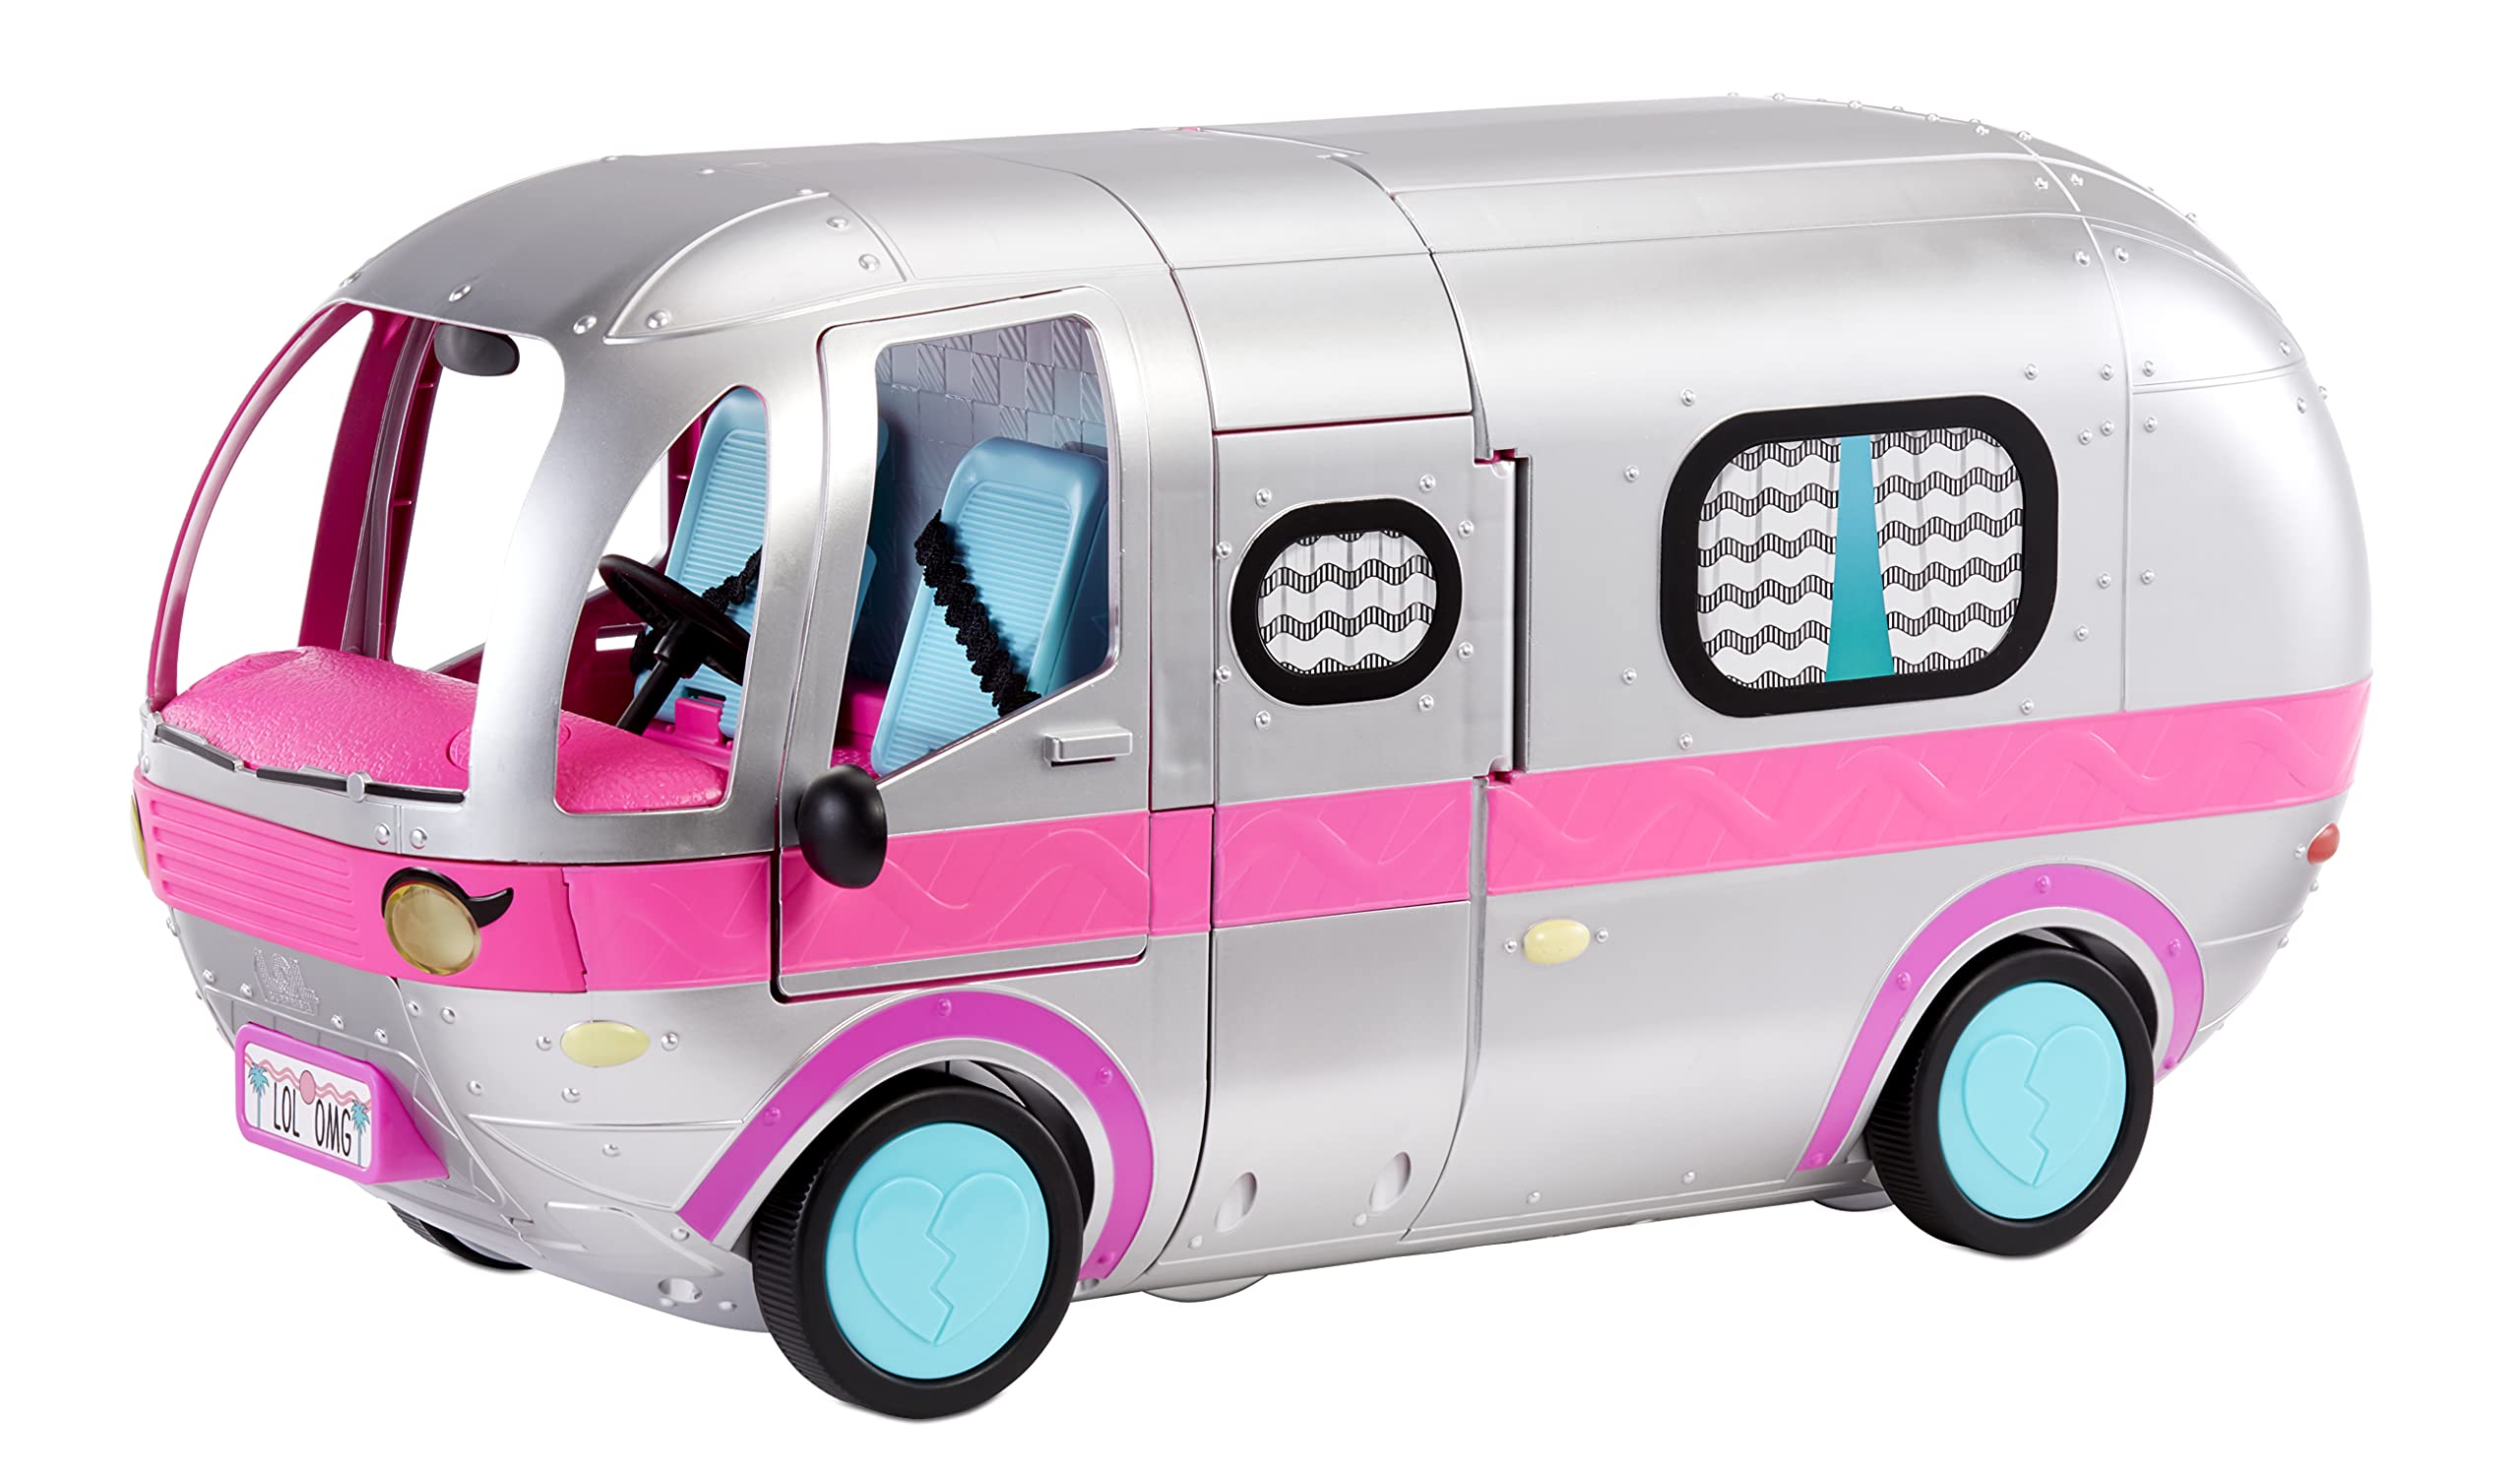 LOL Surprise OMG Glamper Fashion Camper Doll Playset with 55+ Surprises, Fully-Furnished with Light Up Pool, Water Slide, Bunk Beds, Cafe, BBQ Grill, DJ Booth - Gift Toy for Girls Ages 4 5 6 7+ Years